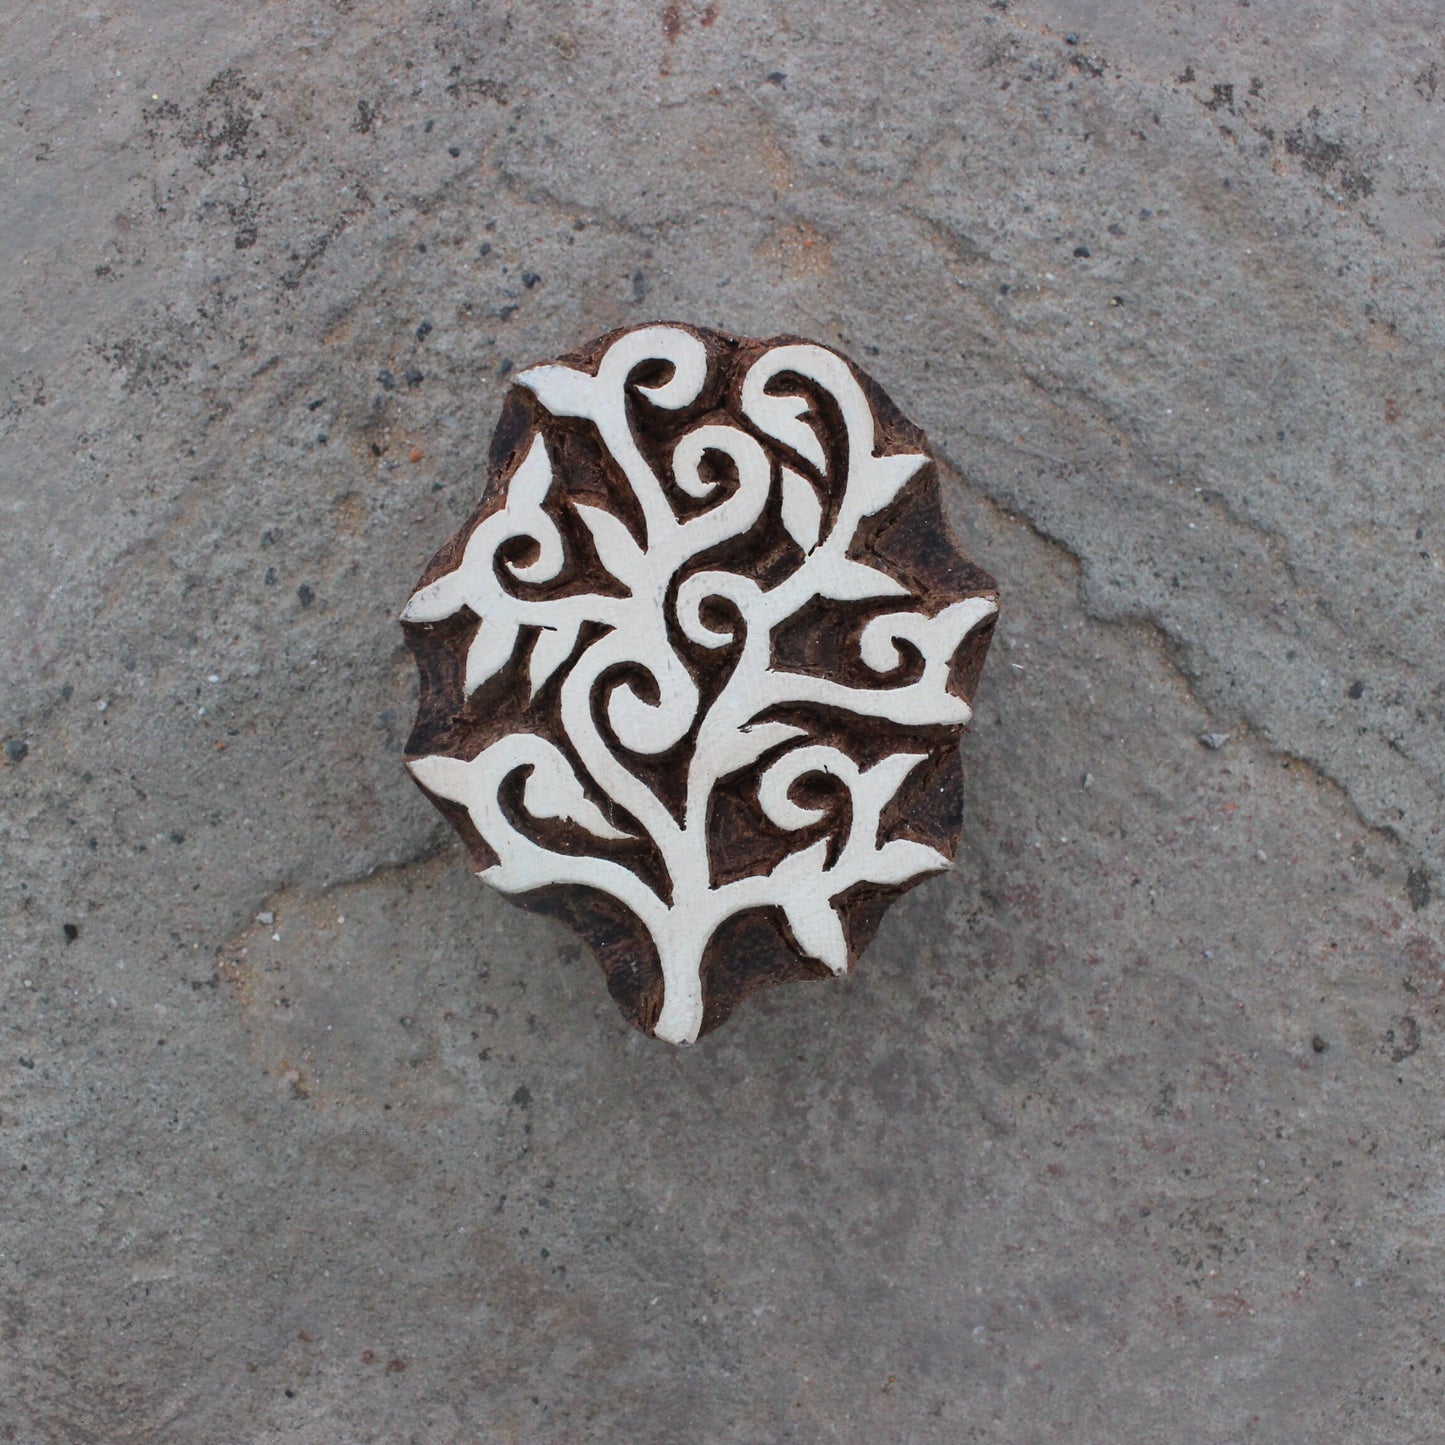 Plant Fabric Stamp Tree Fabric Block Print Stamp Hand Carved Block Stamp Hand Carved Textile Block For Printing Leaves Soap Making Stamp